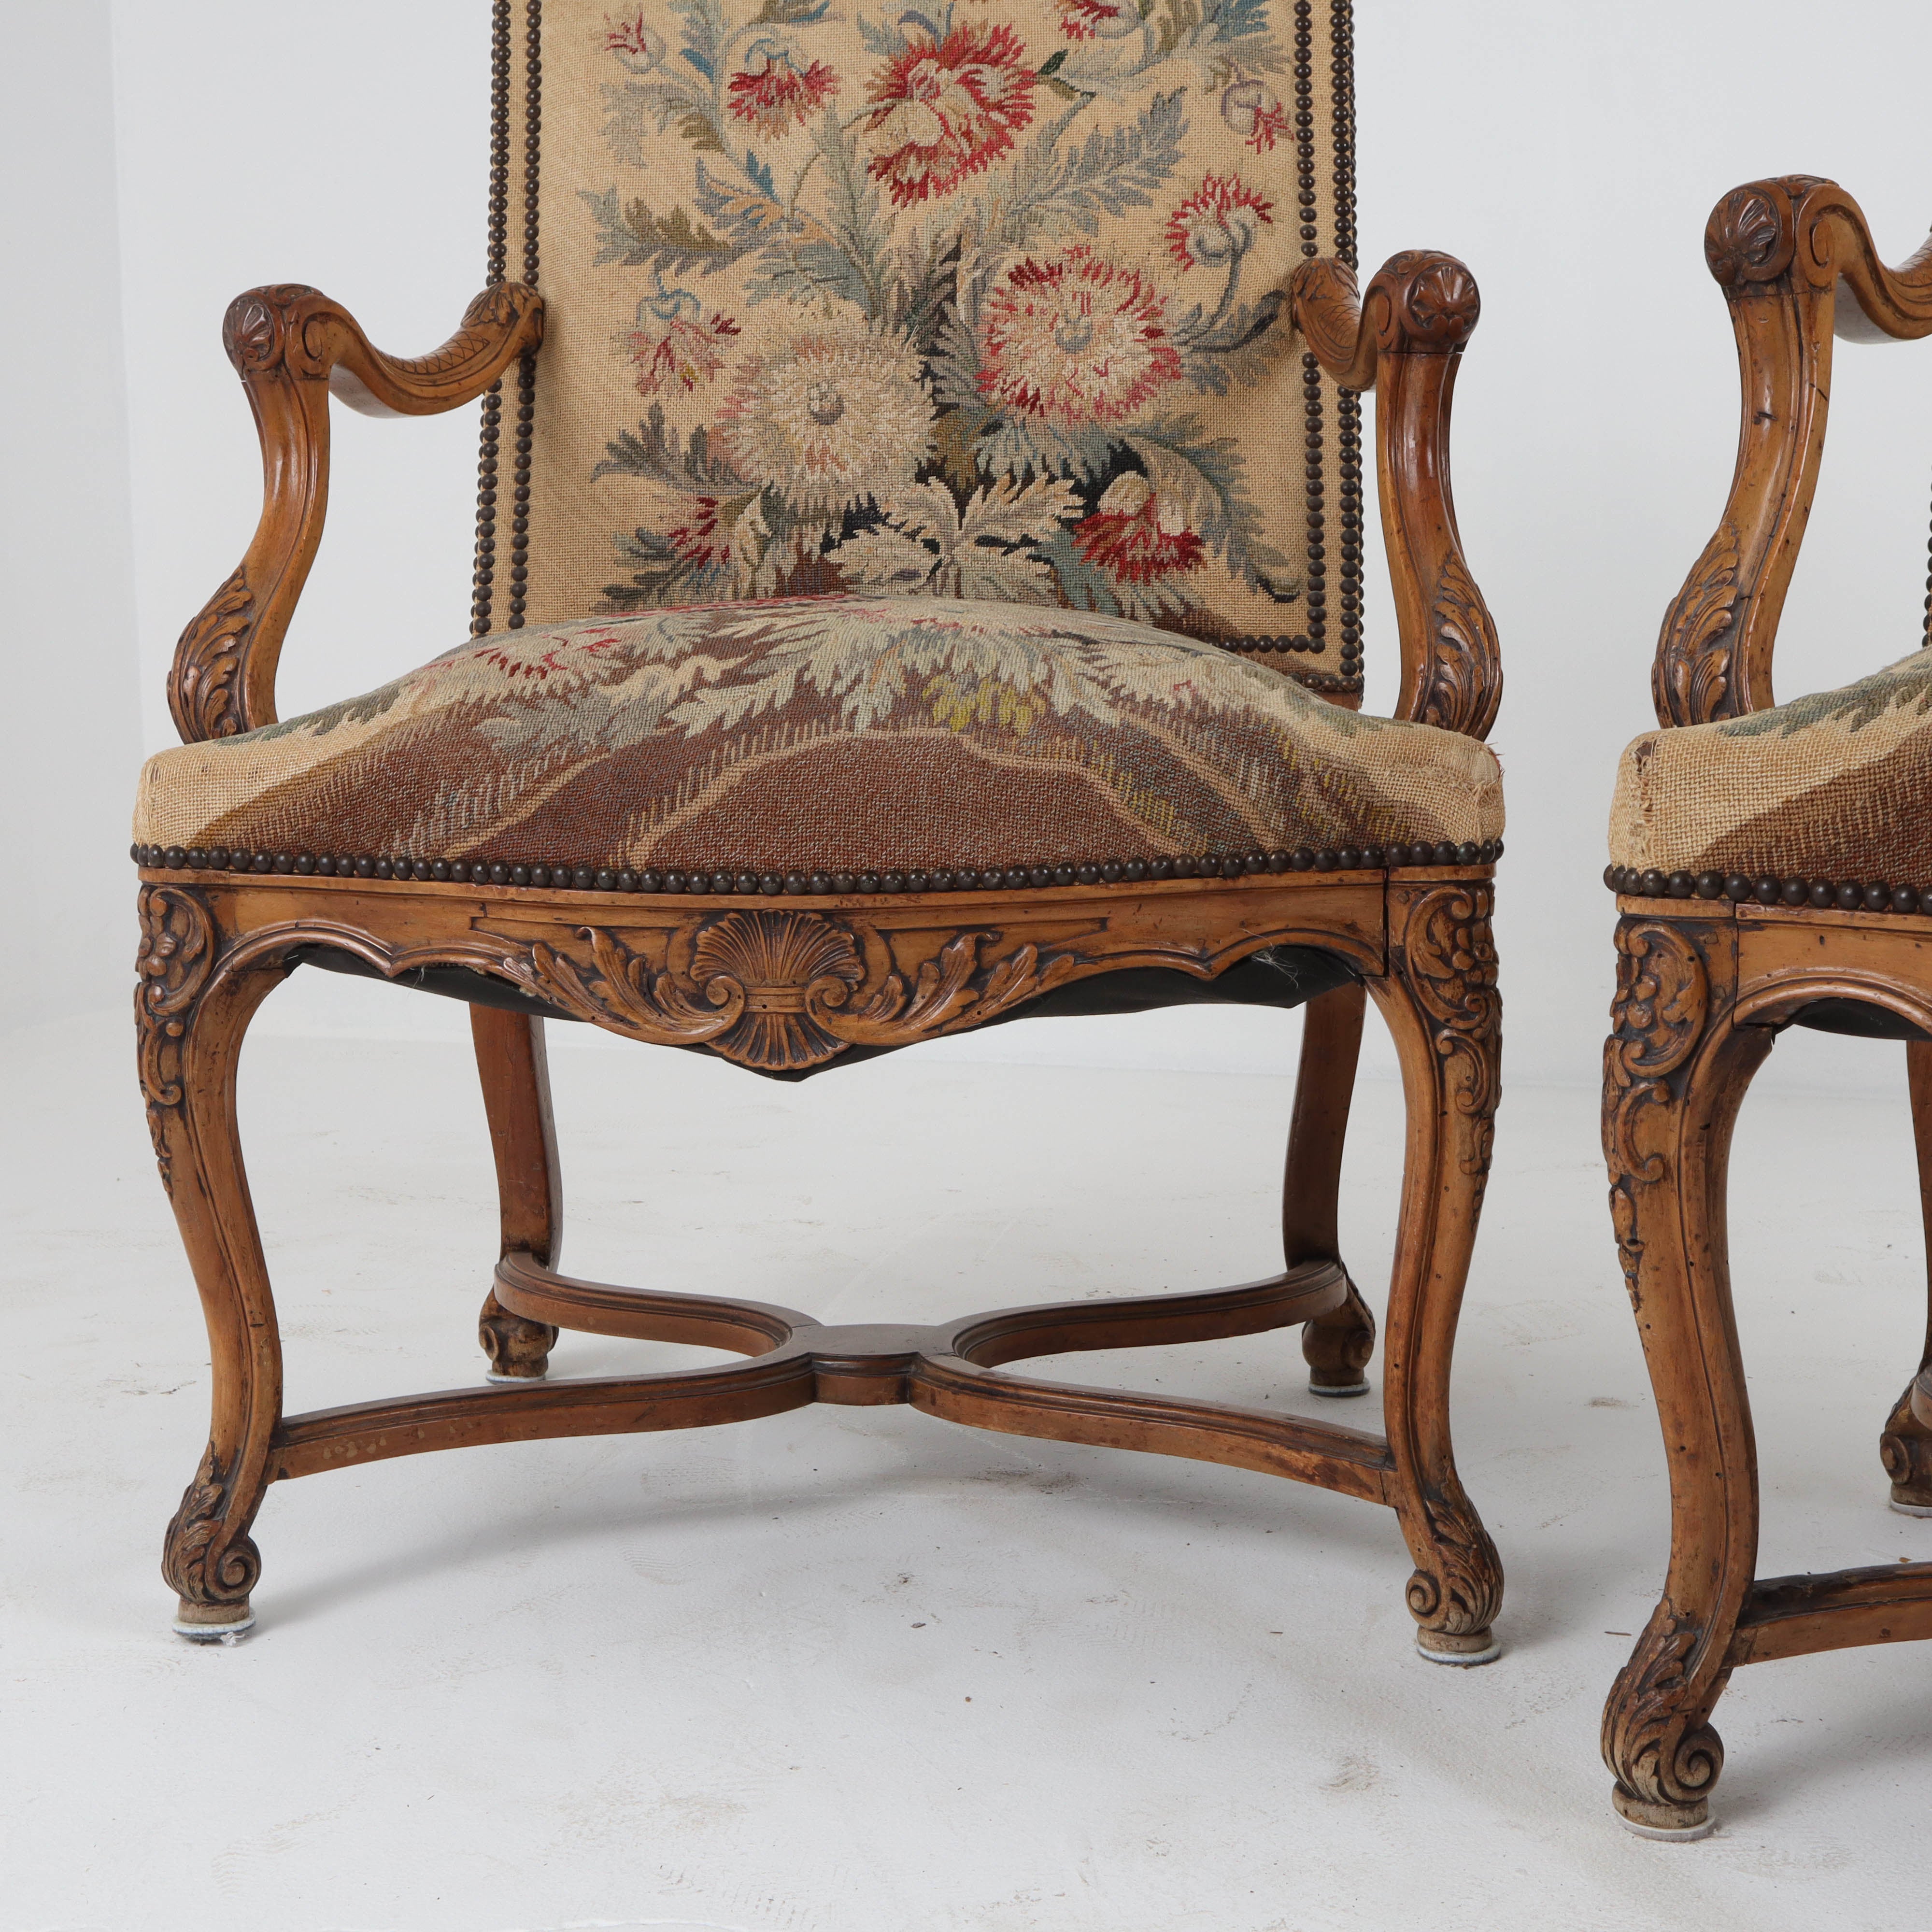 Pair of French Antique Needlepoint Fauteuil Chairs c1850